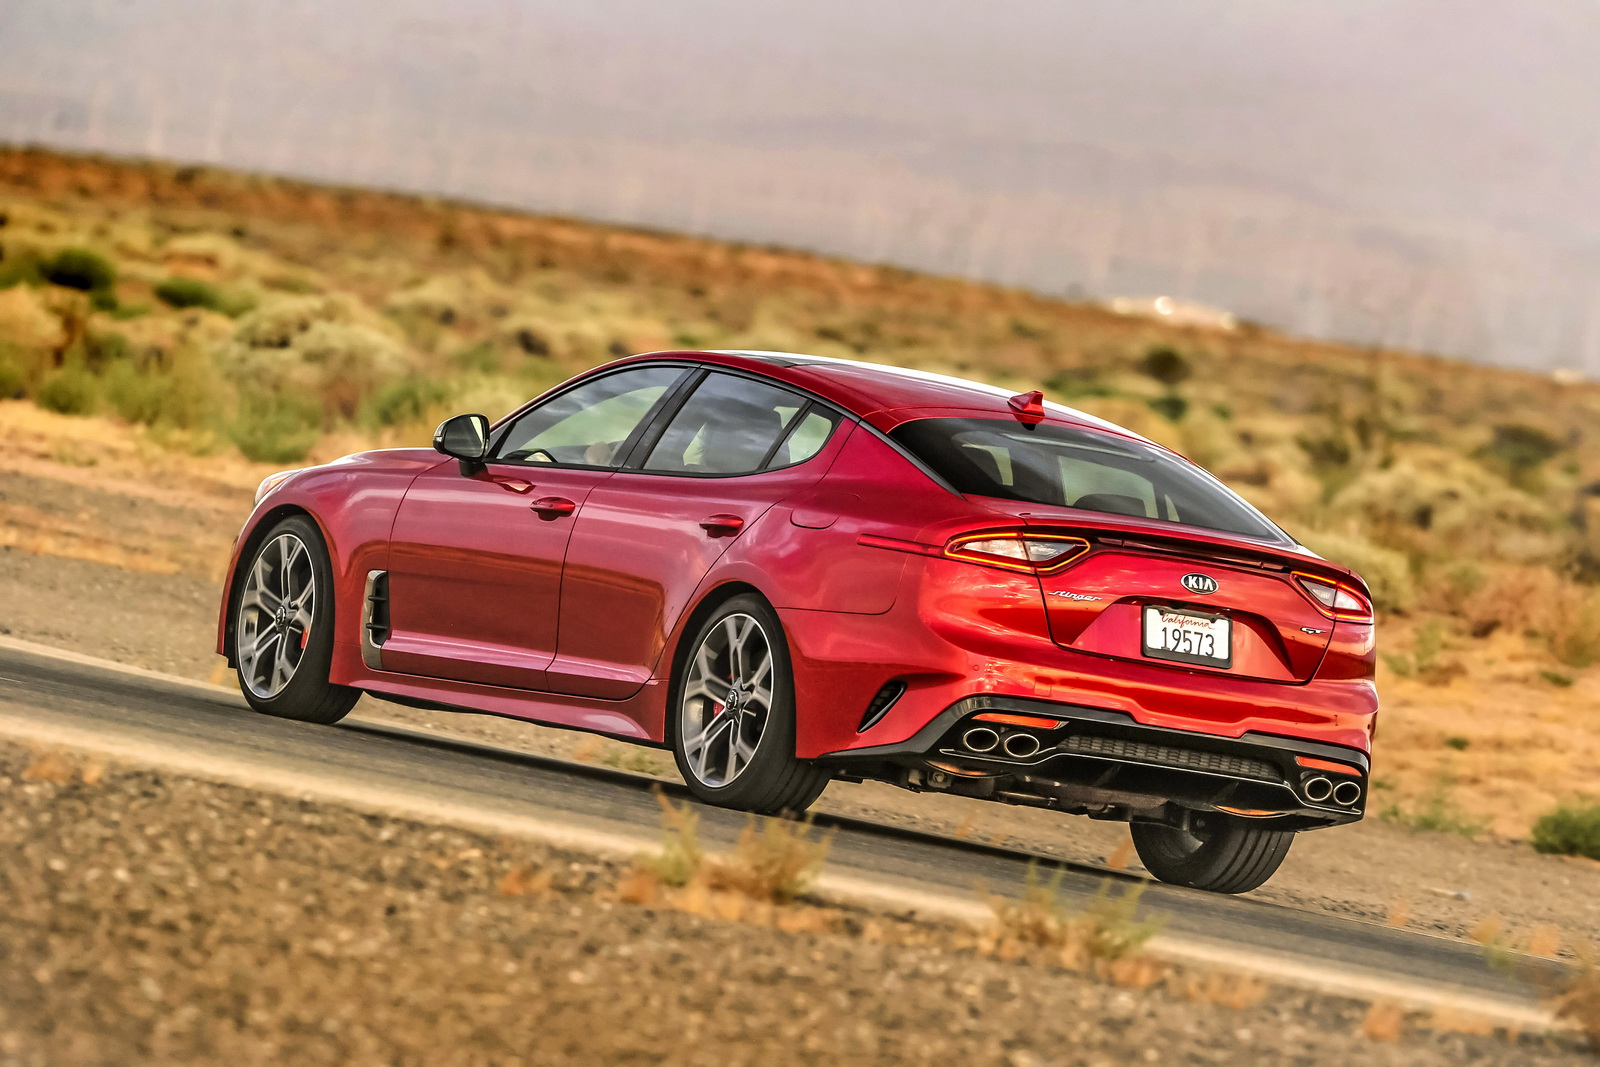 2018 Kia Stinger Lease Deals Start From 382* A Month car news